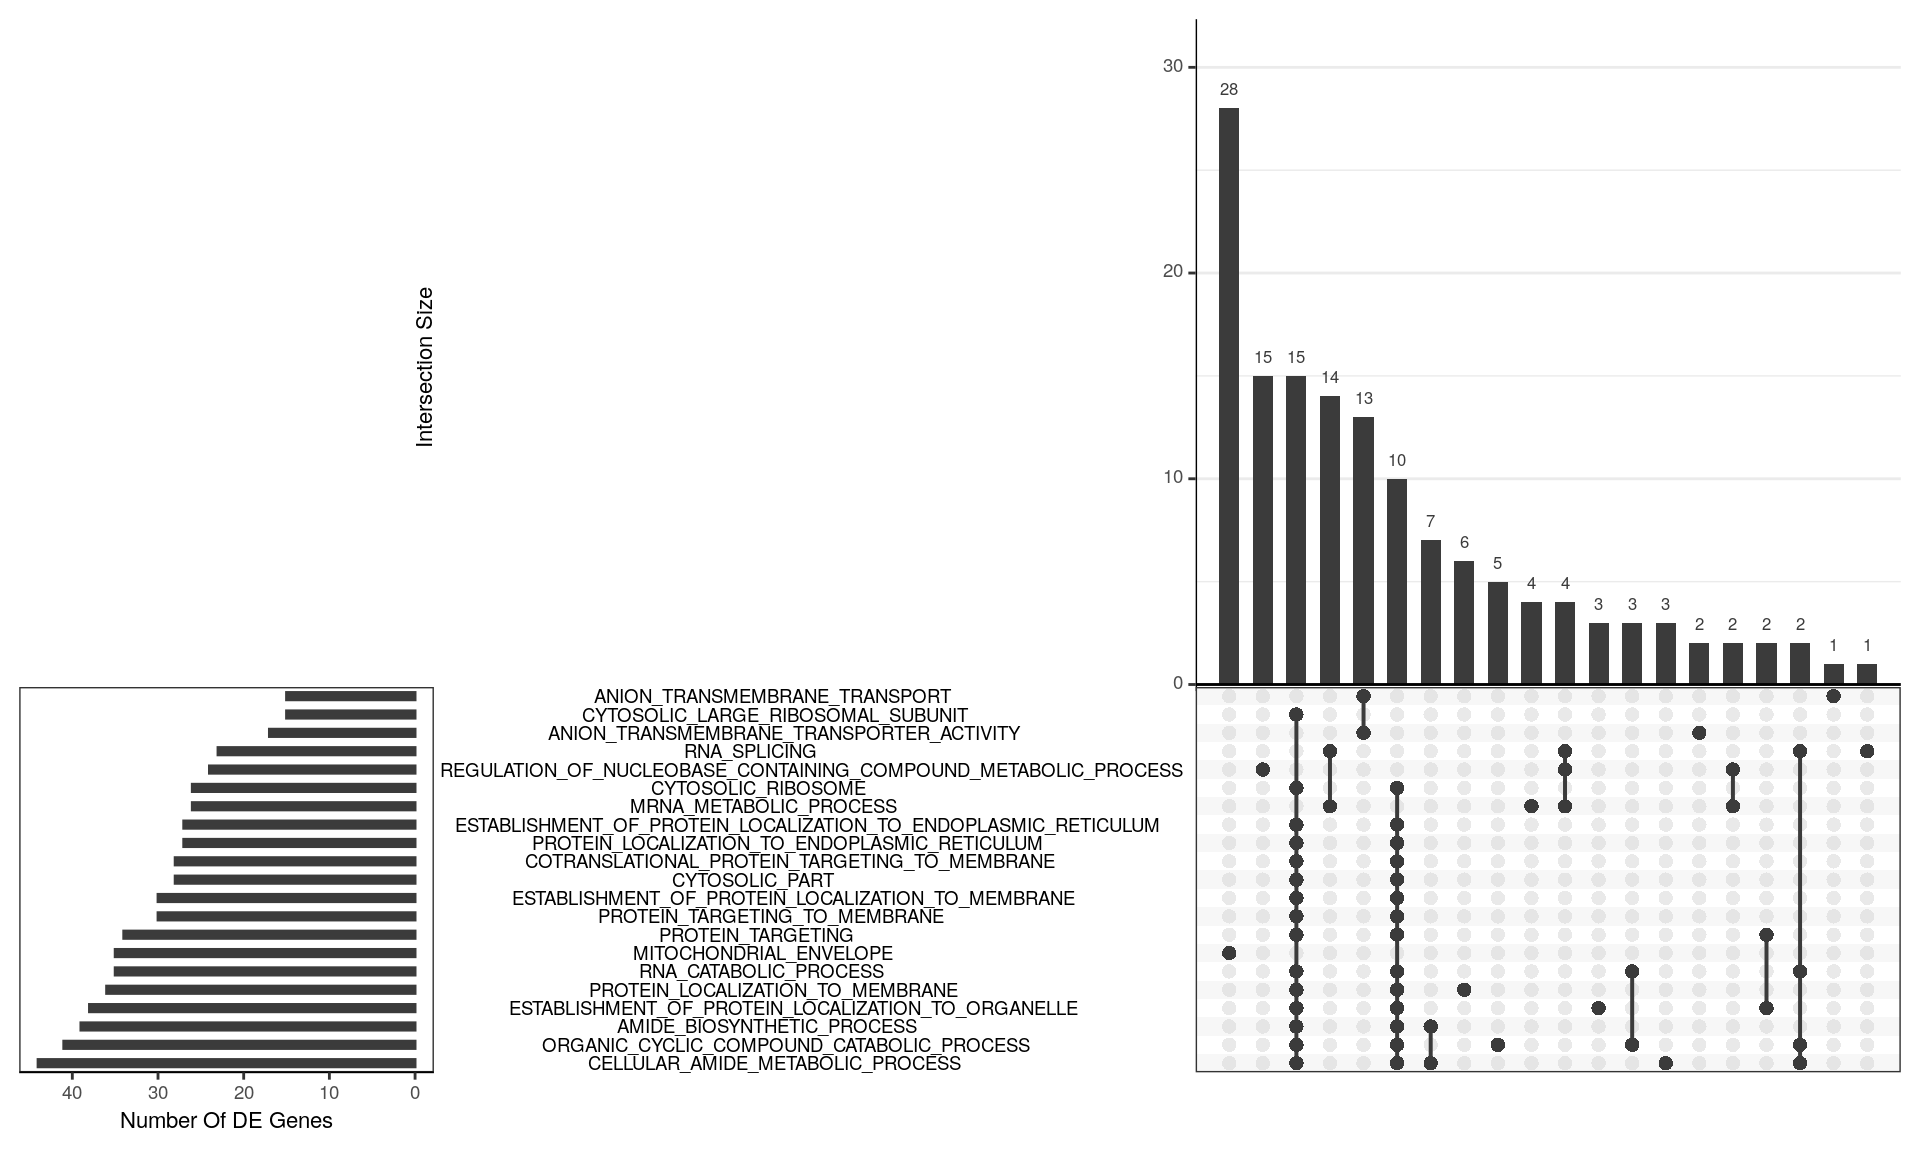 *UpSet plot indicating distribution of DE genes within significantly enriched terms from the GO gene sets. For this visualisation, GO terms were restricted to those with 15 or more DE genes, where this represented more than 5% of a gene set as being DE, along with an FDR < 0.02 and more than 3 steps back to the ontology root. The 20 largest GO terms satisfying these criteria are shown. The plot is  truncated at the right hand side for simplicity. A group of 28 genes is uniquely attributed to the Mitochondrial Envelope, with a further 18 being relatively unique to mRNA Metabolic Process. The next grouping of 15 genes are unique to Regulation Of Nucleobase-Containing Compound Metabolic Process followed by 25 genes, spread across two clusters of terms which largely represent Ribosomal activity. In between these are 13 genes uniquely associated with Anion Transport.*